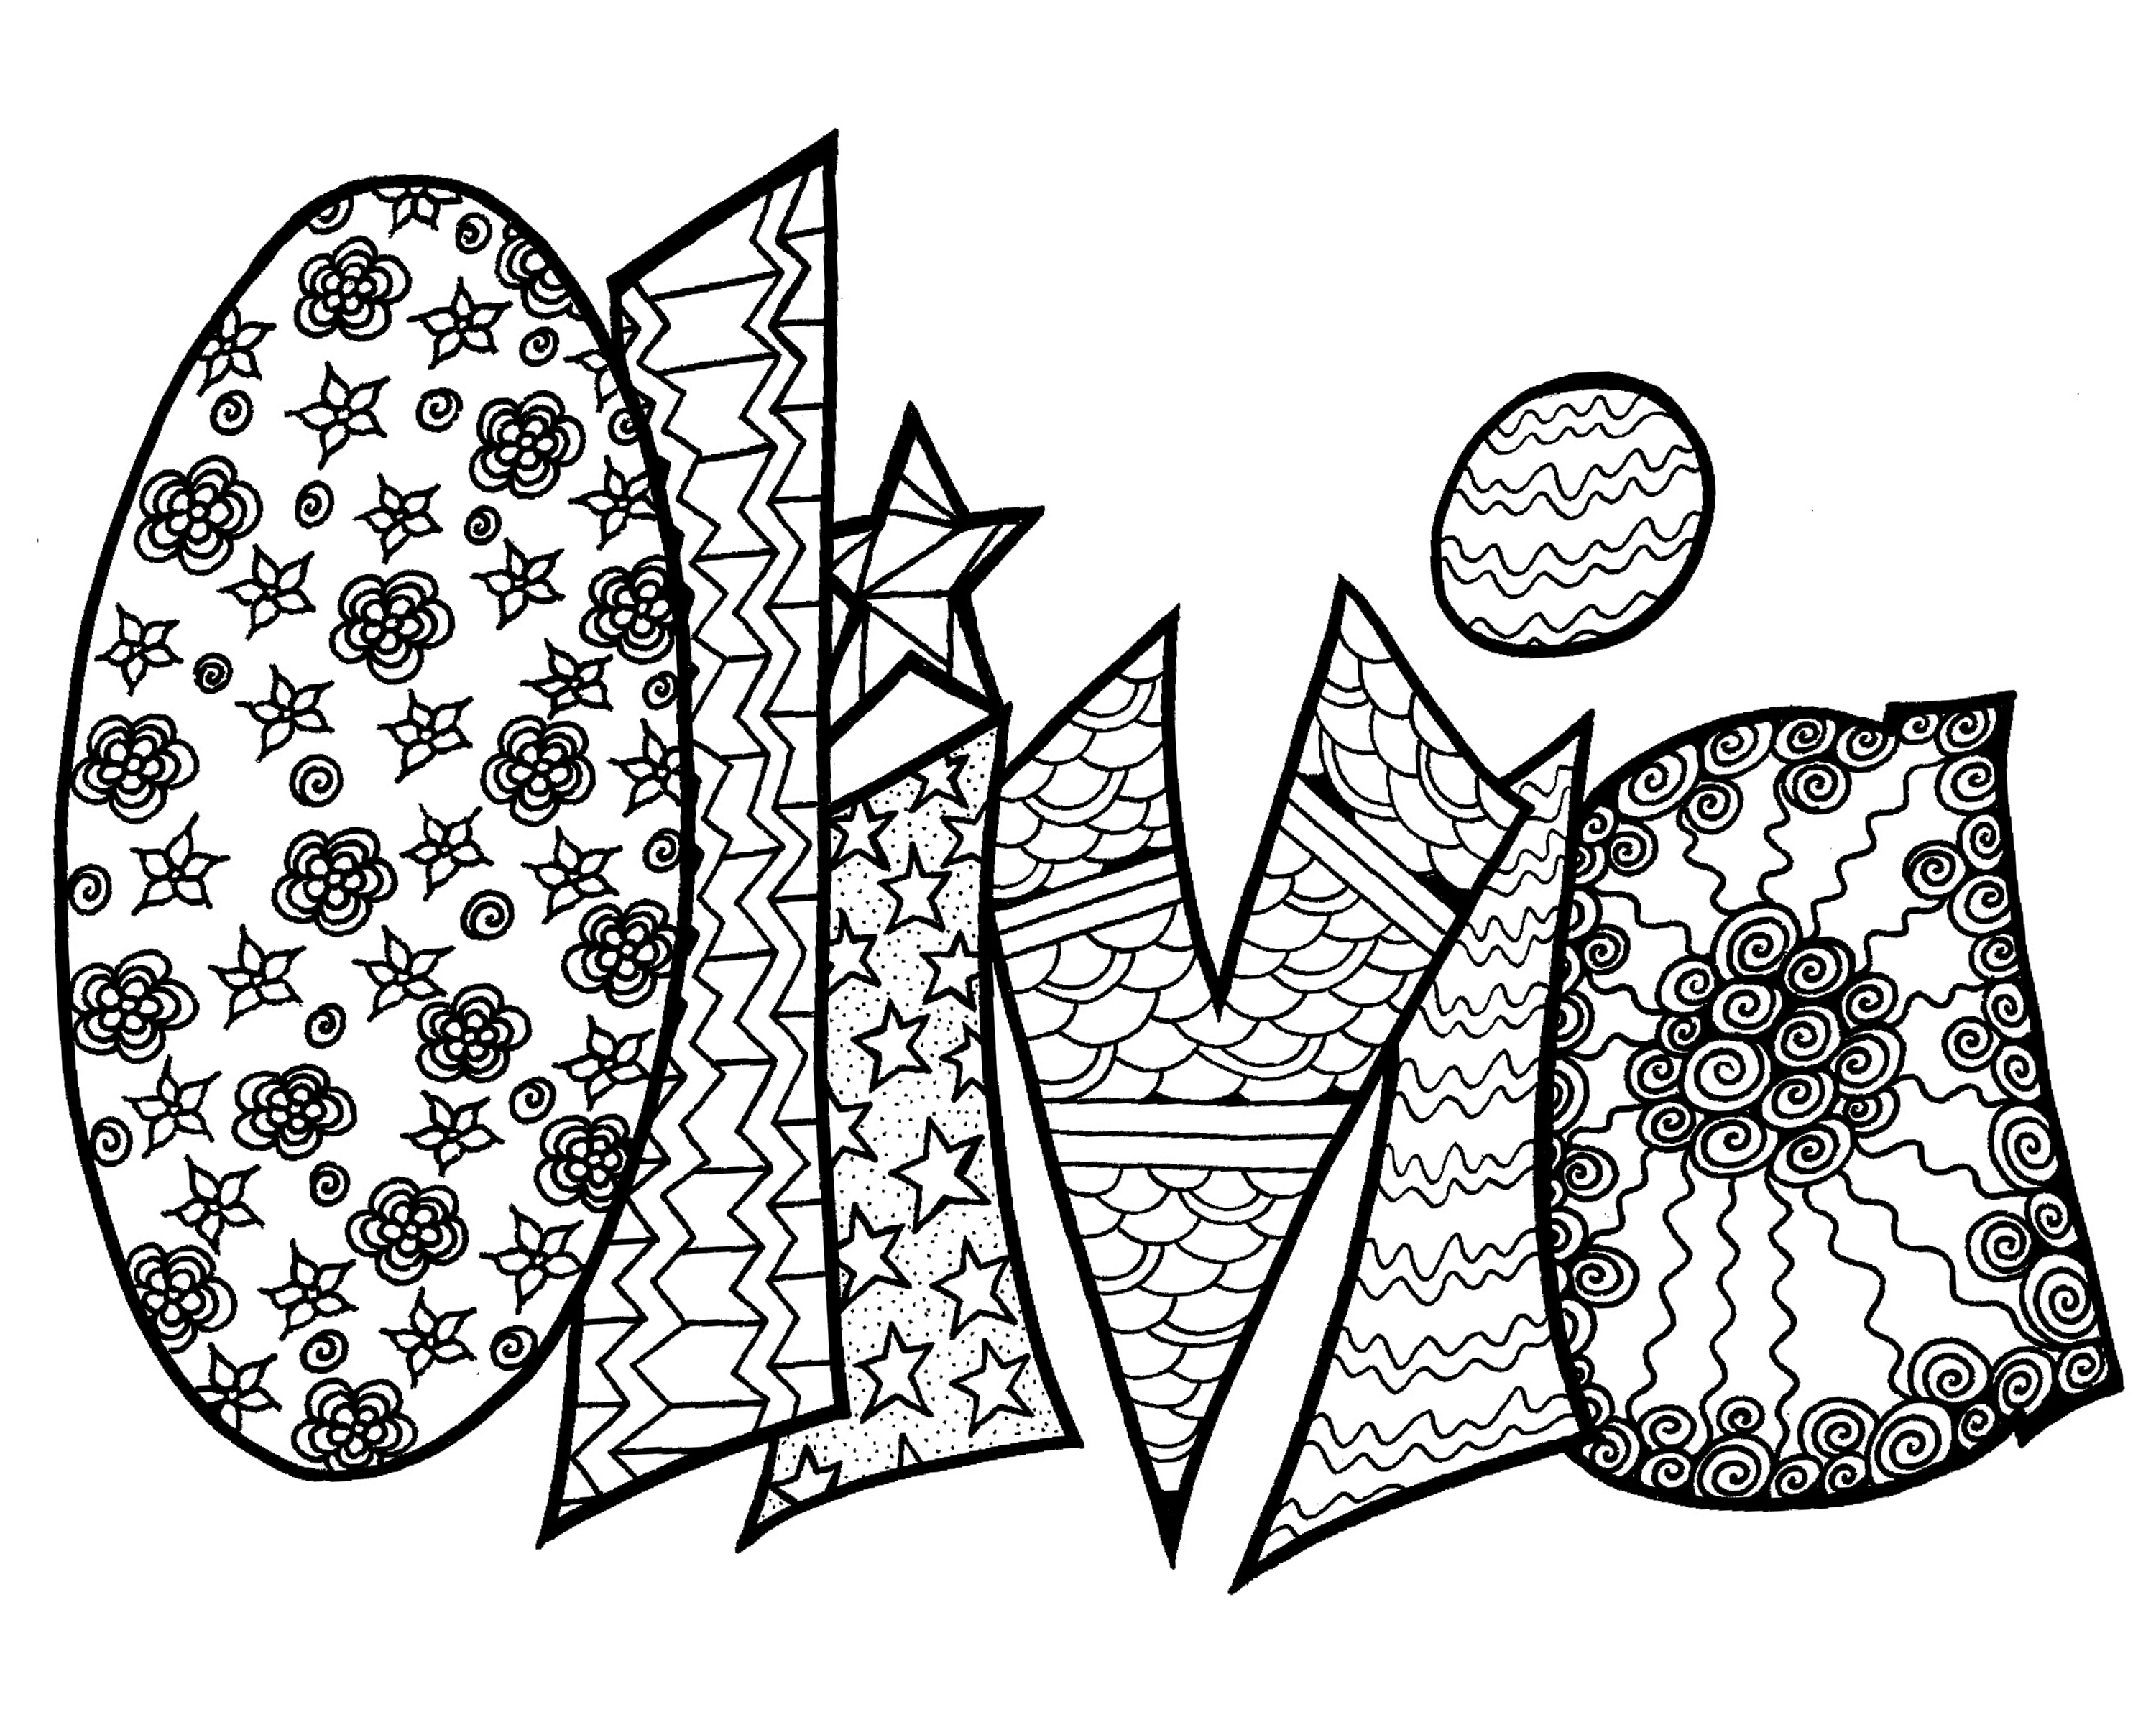 Customized Coloring Pages Collection Customized Coloring Pages Pictures Asteknikyapi